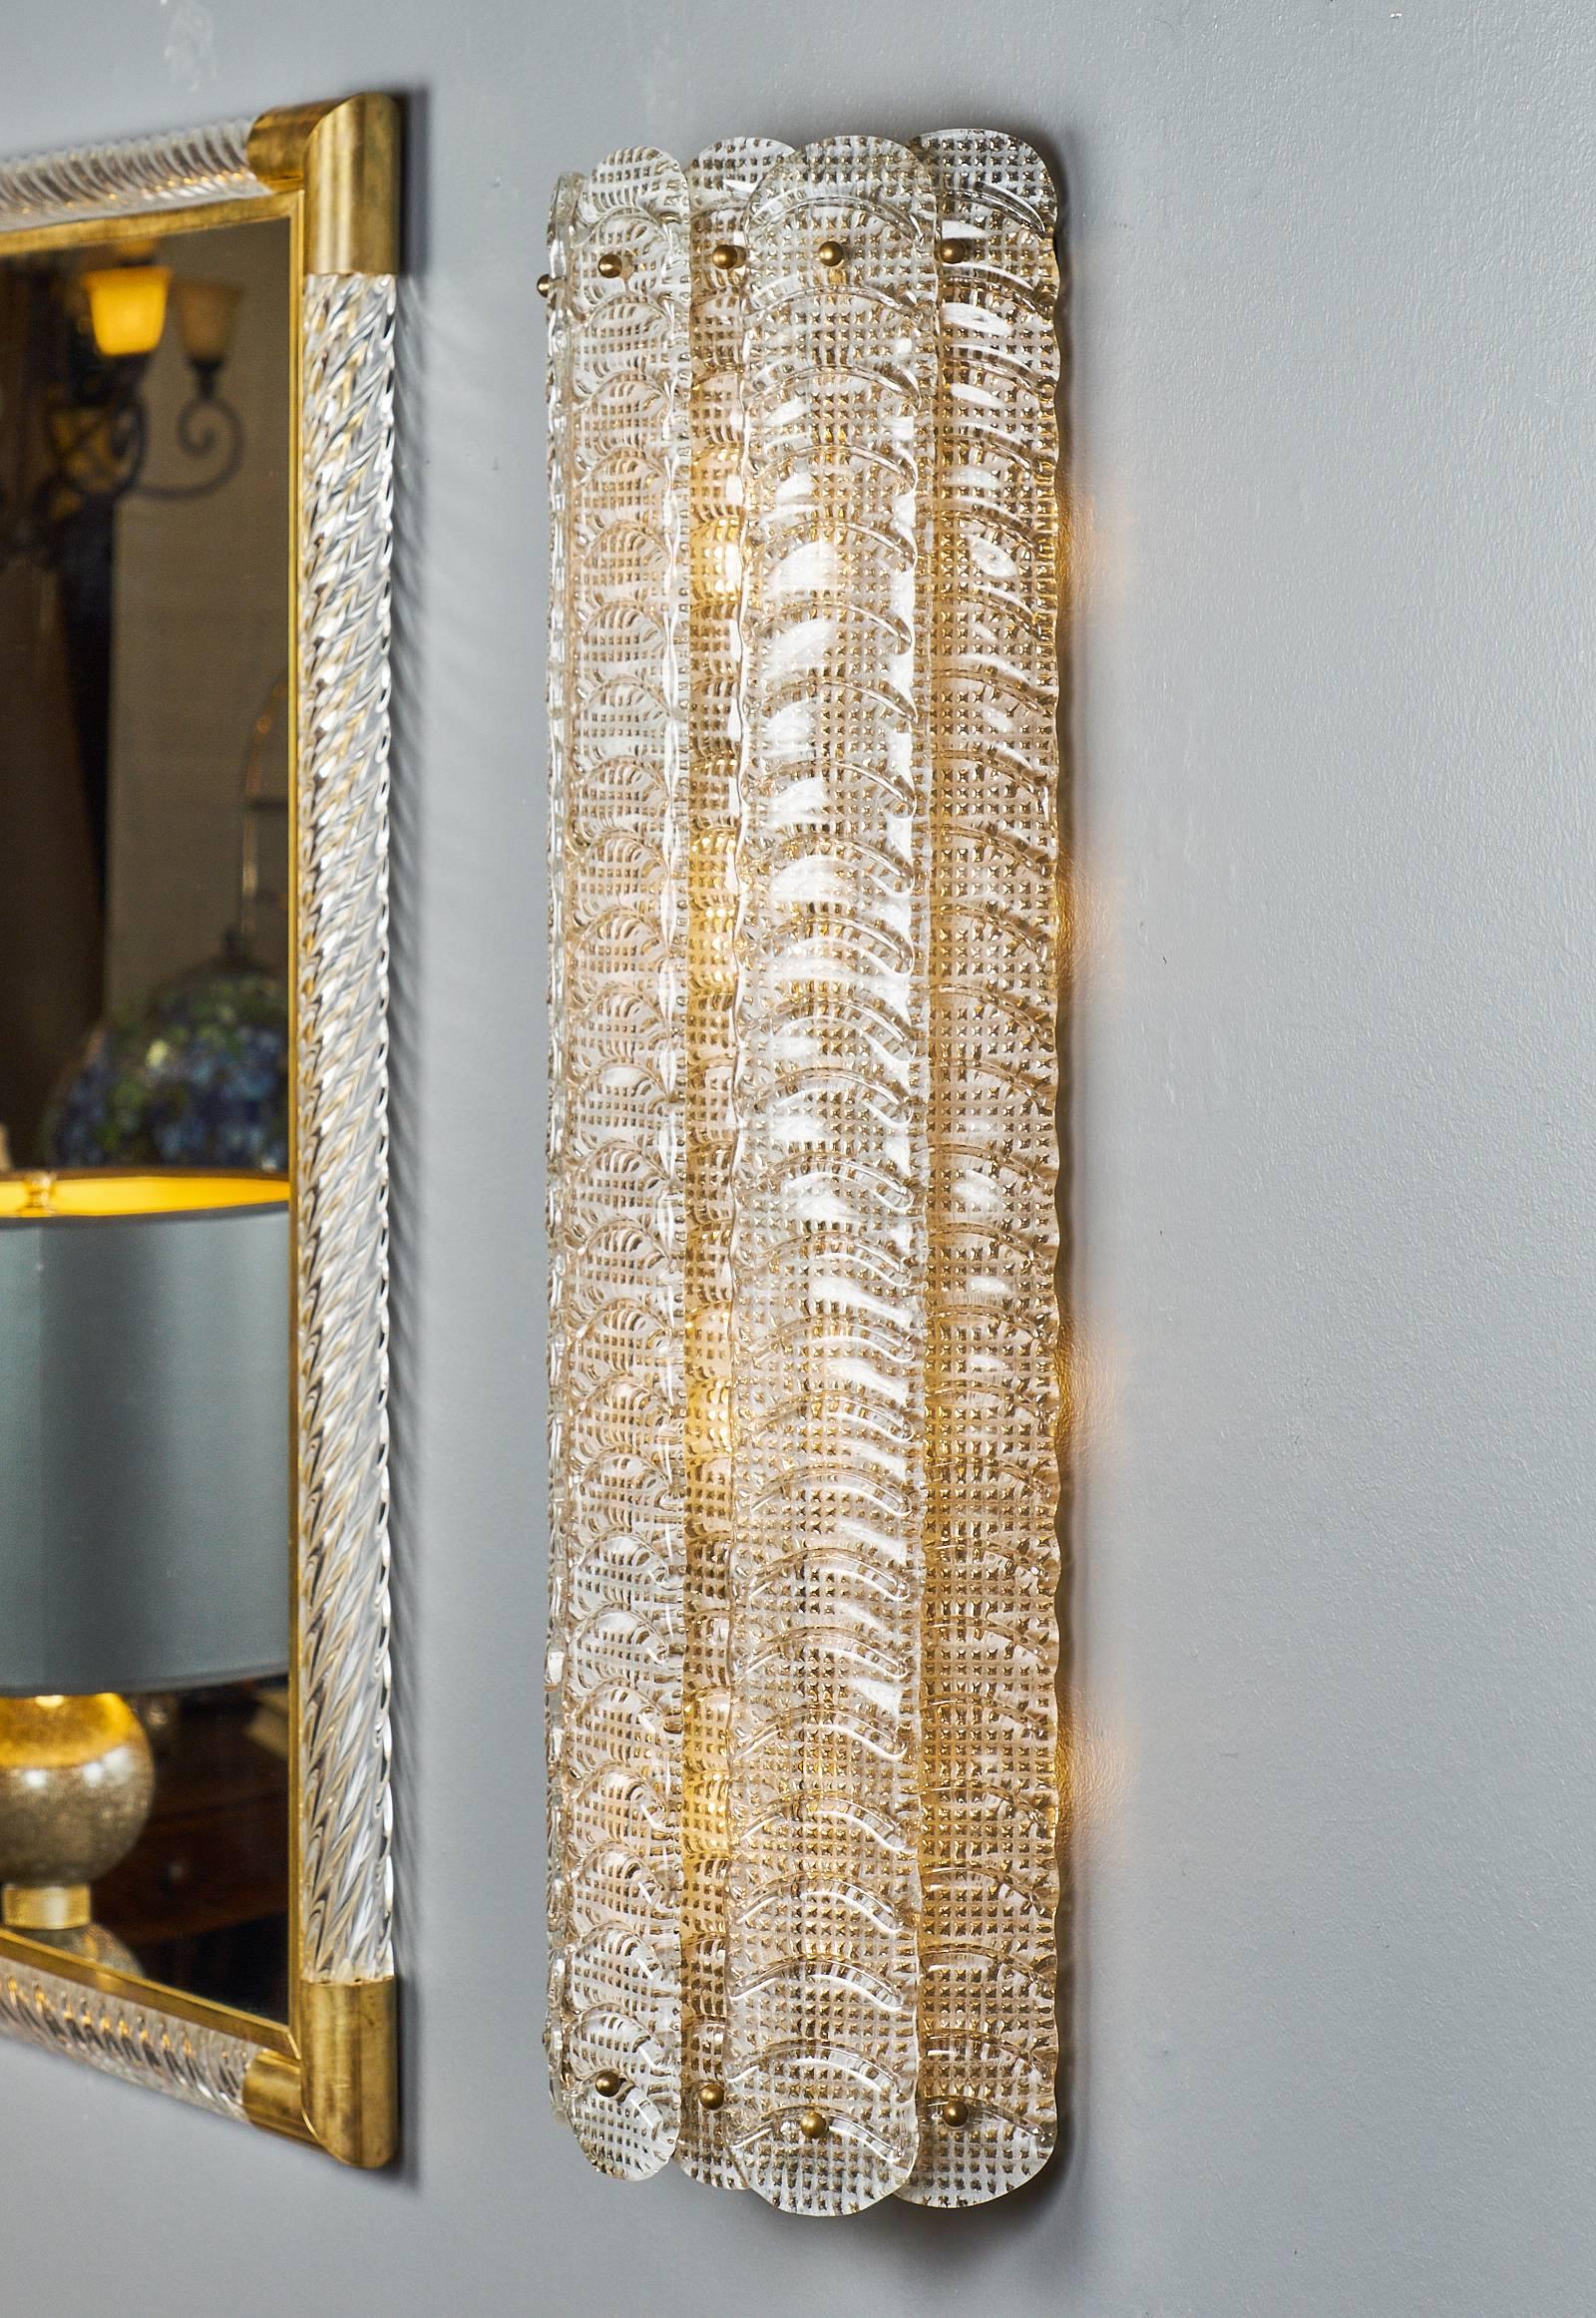 Pair of handblown Murano glass wall sconces, each featuring eight stamped blades with “Reticello” weaving and stylized feather-like texture. The effect makes these fixtures look like python skin! The sconces provide great warm, diffused light. Each